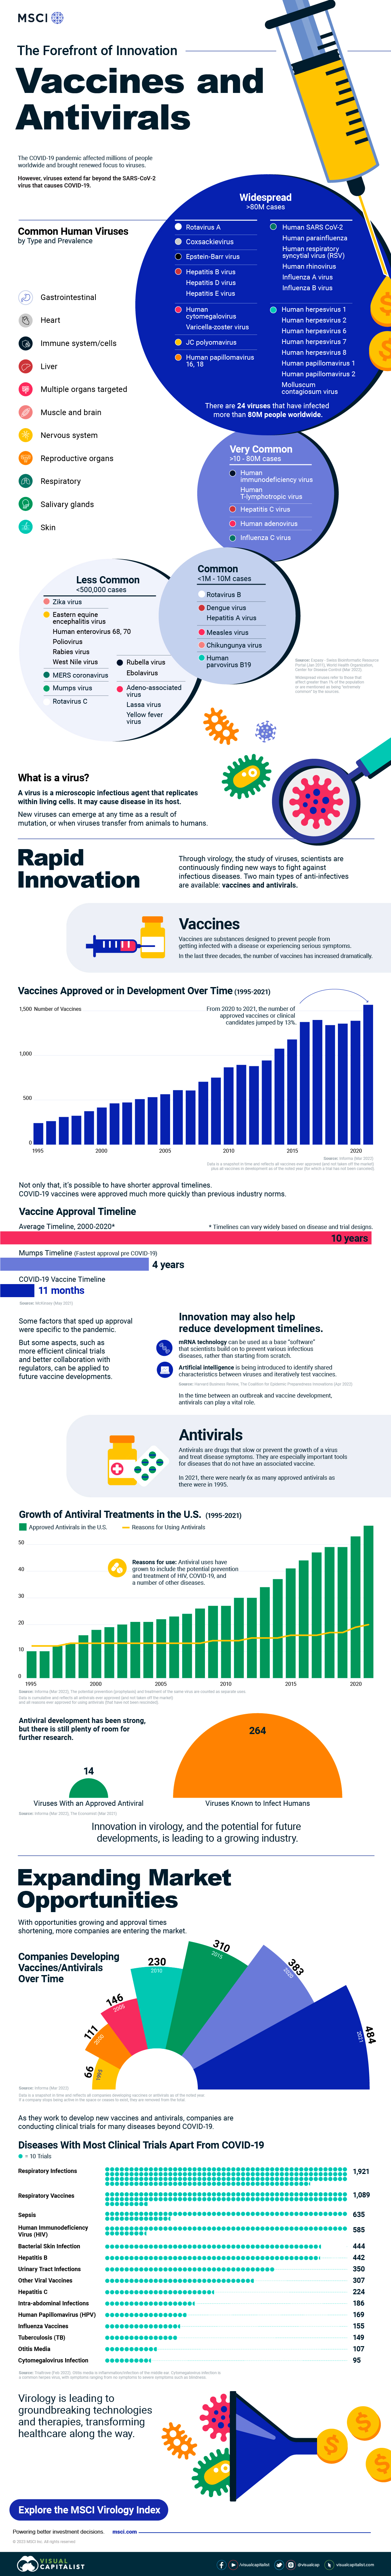 A series of charts that show innovation in virology including vaccine development over time, antiviral treatment growth, and the number of companies developing vaccines or antivirals over time.